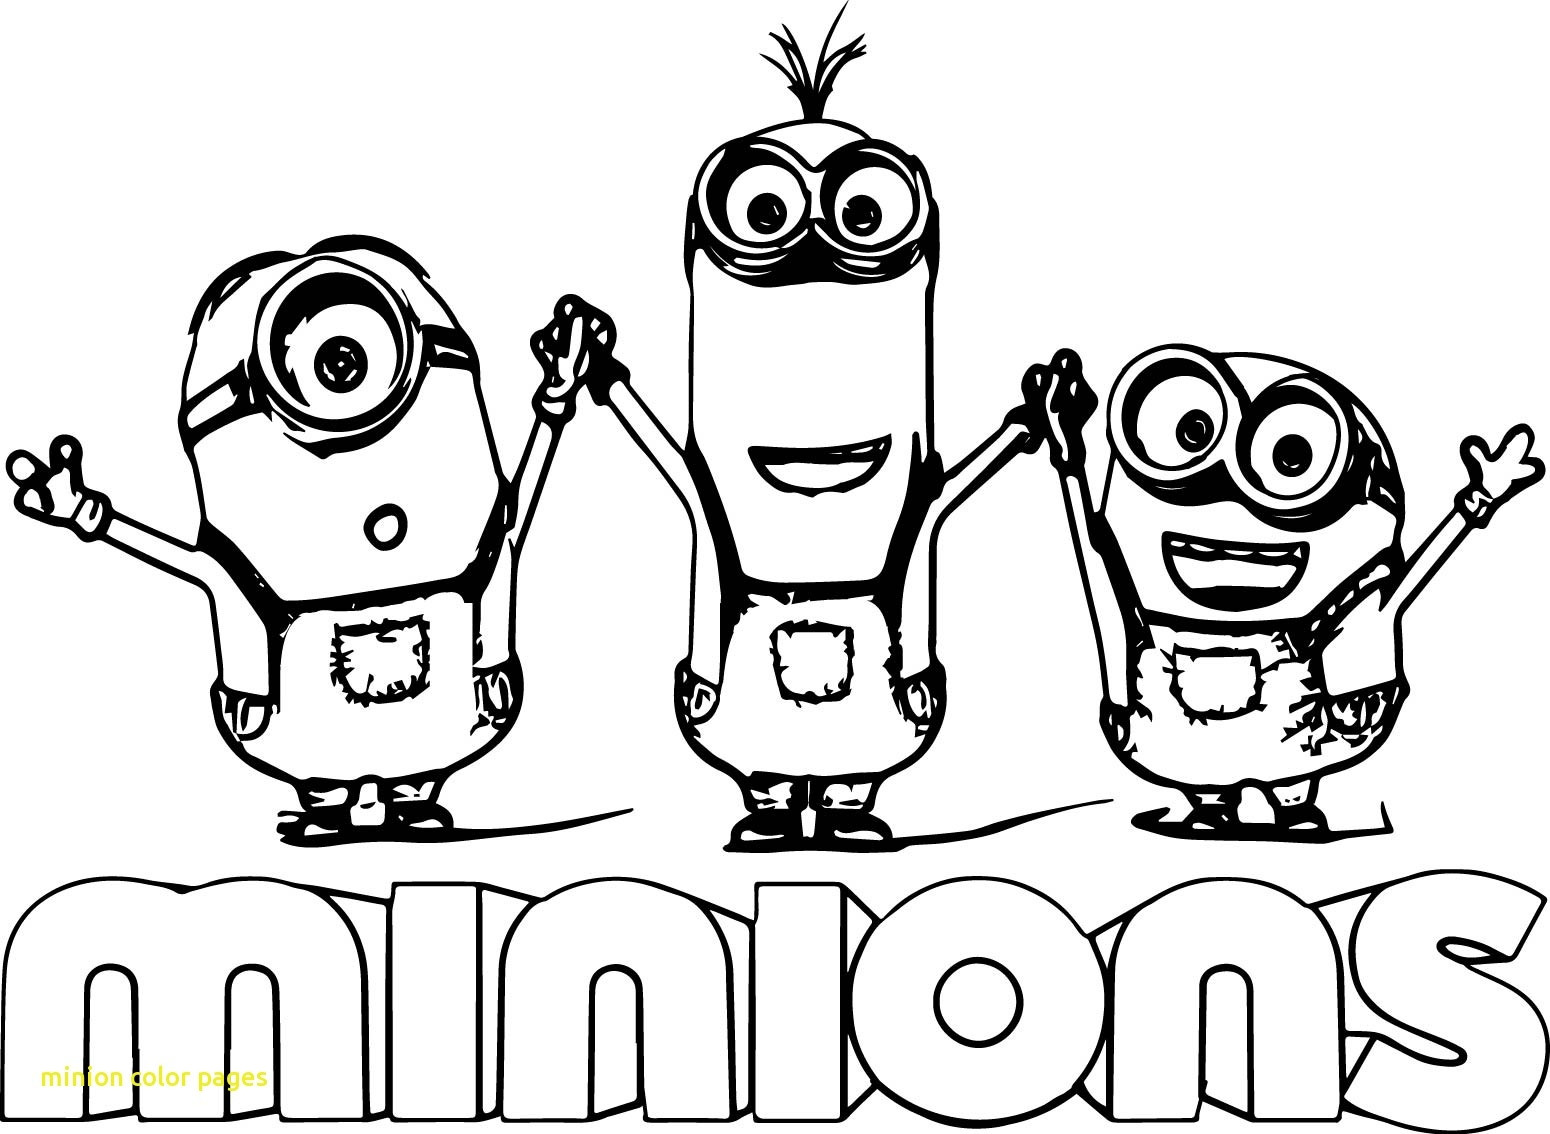 minions-coloring-pages-banana-at-getcolorings-free-printable-colorings-pages-to-print-and